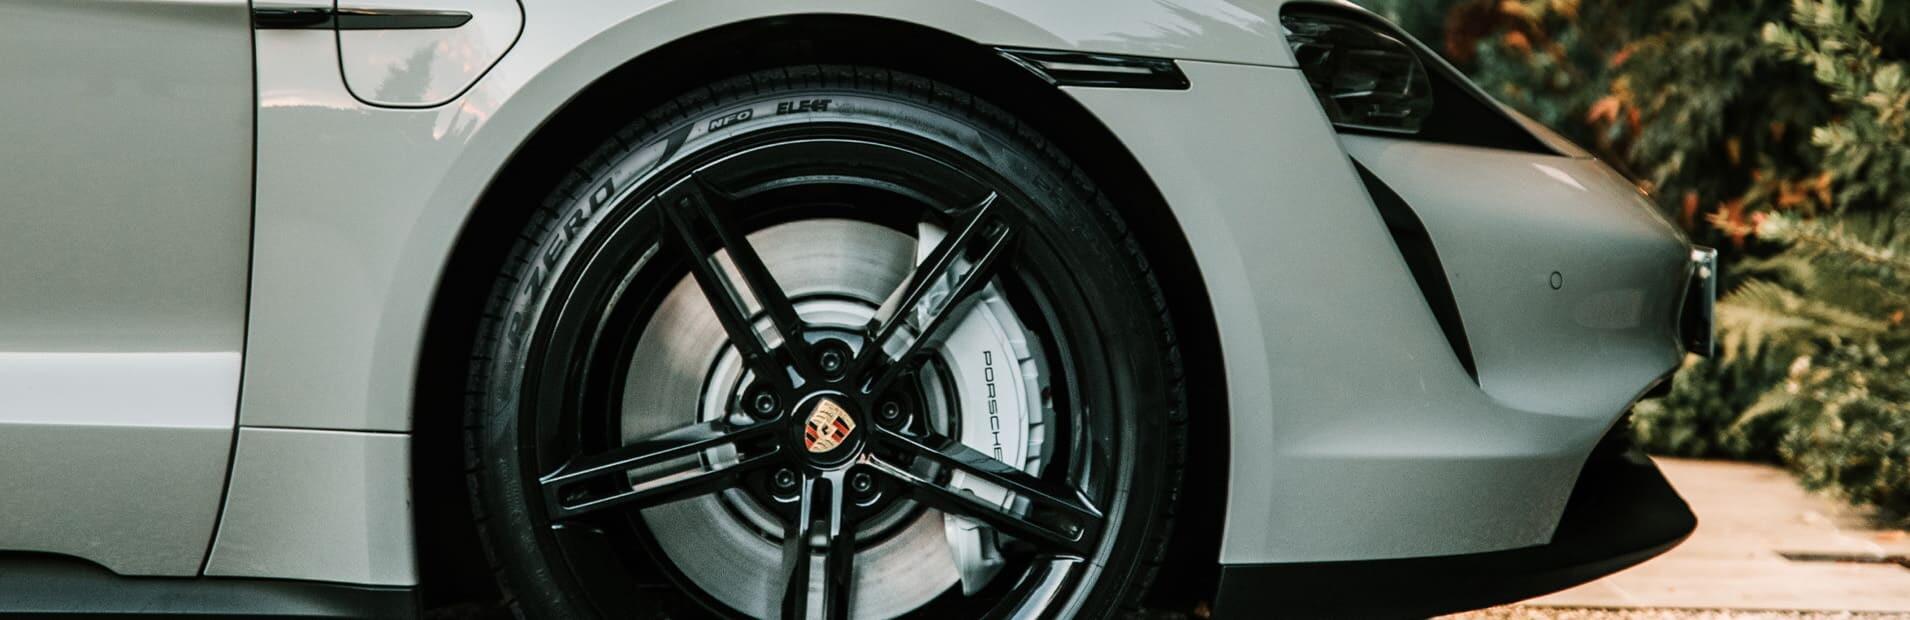 Tyres and wheel rims: how to choose the right ones